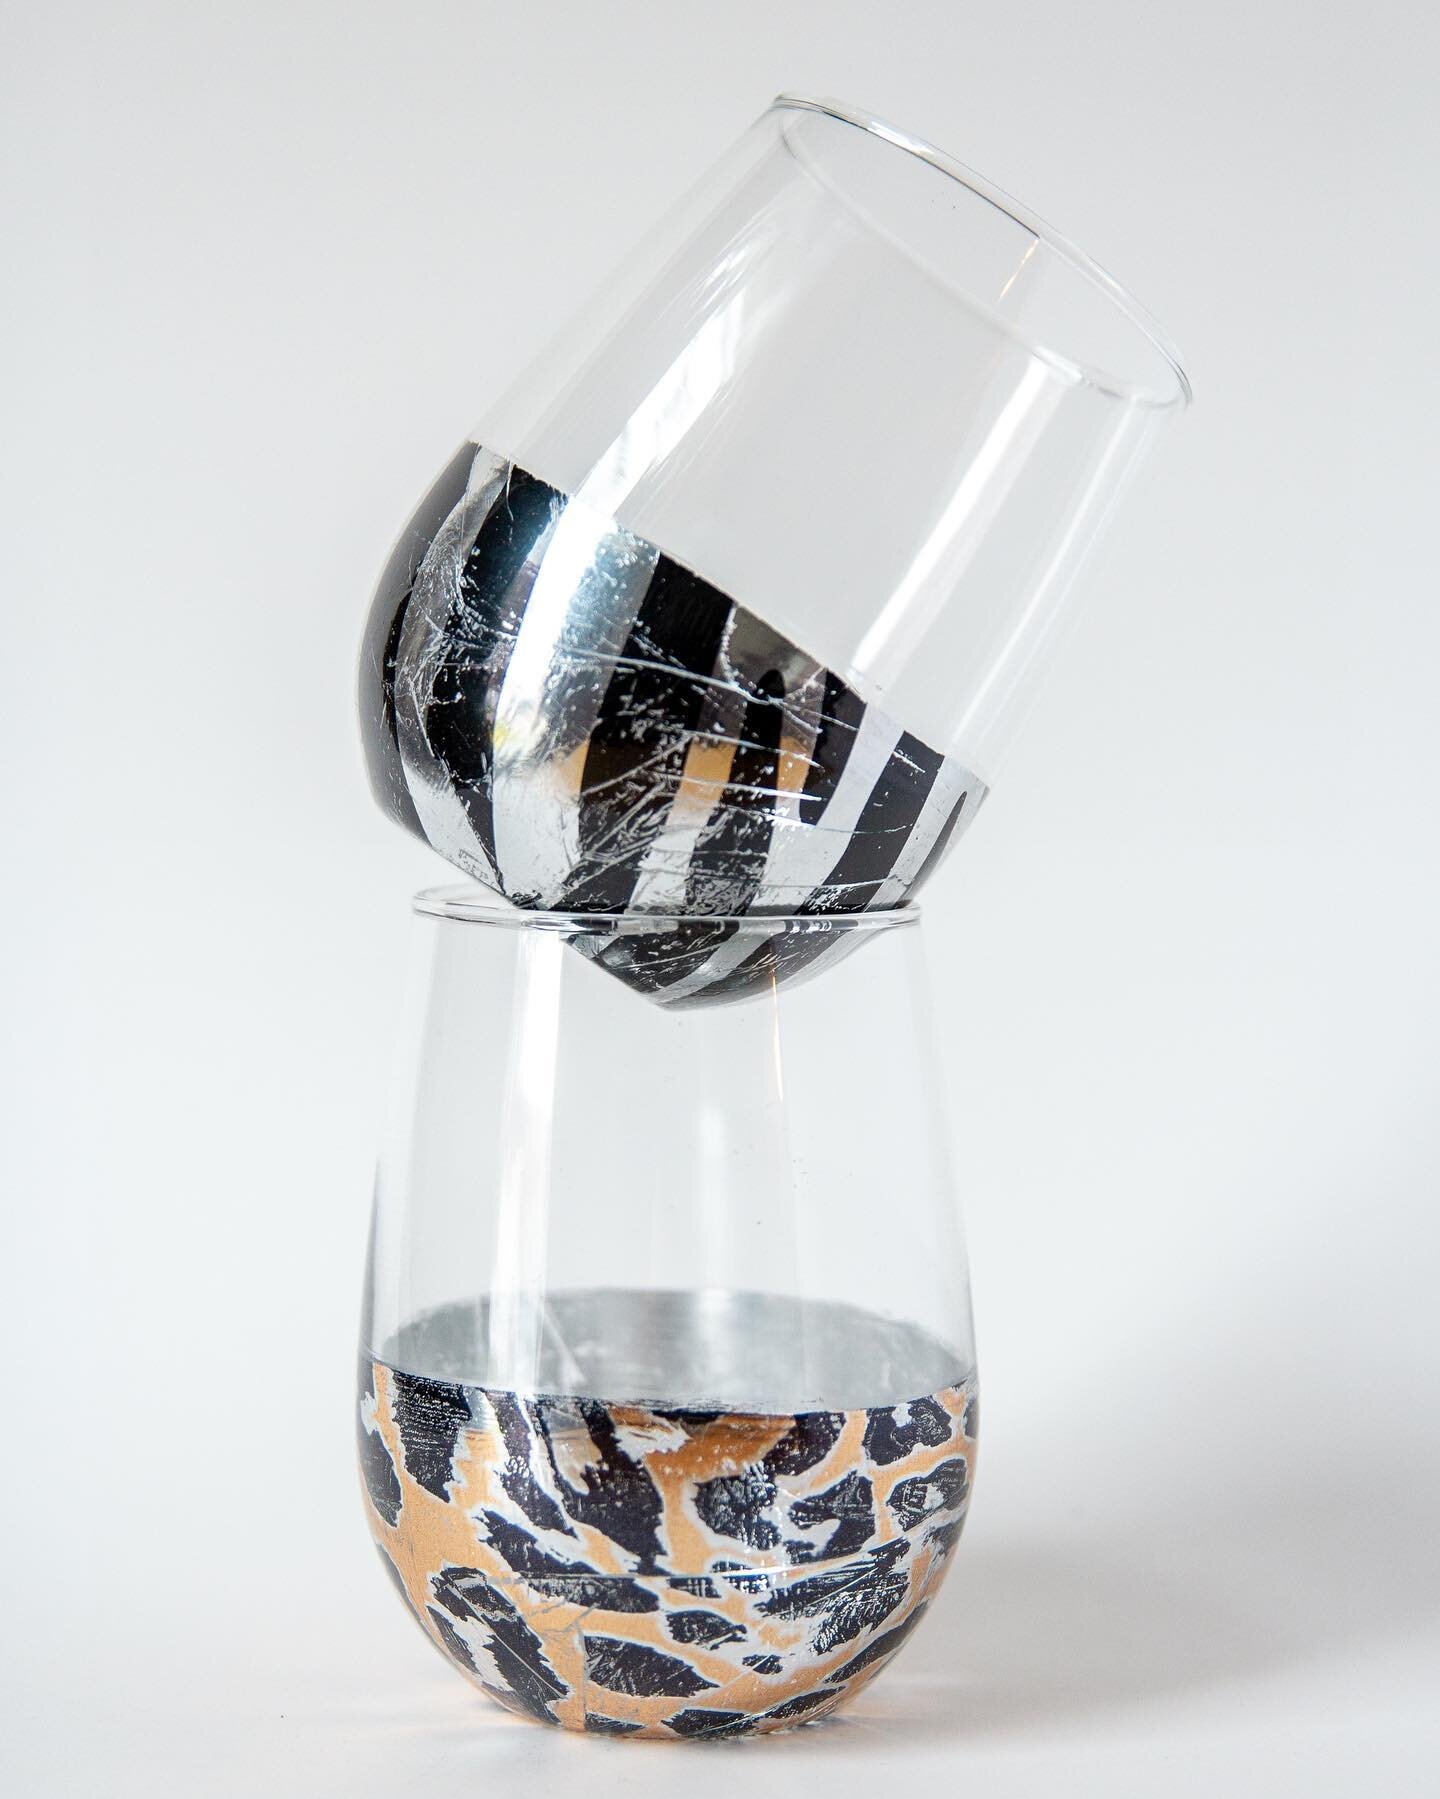 I don&rsquo;t always go product shots but when I do, I&rsquo;m glad it&rsquo;s for amazing artists like @brynntylerdesigns.  I have several of their wine glasses in my shelves but have fallen in love with a few new ones. Aren&rsquo;t they lovely? 

#